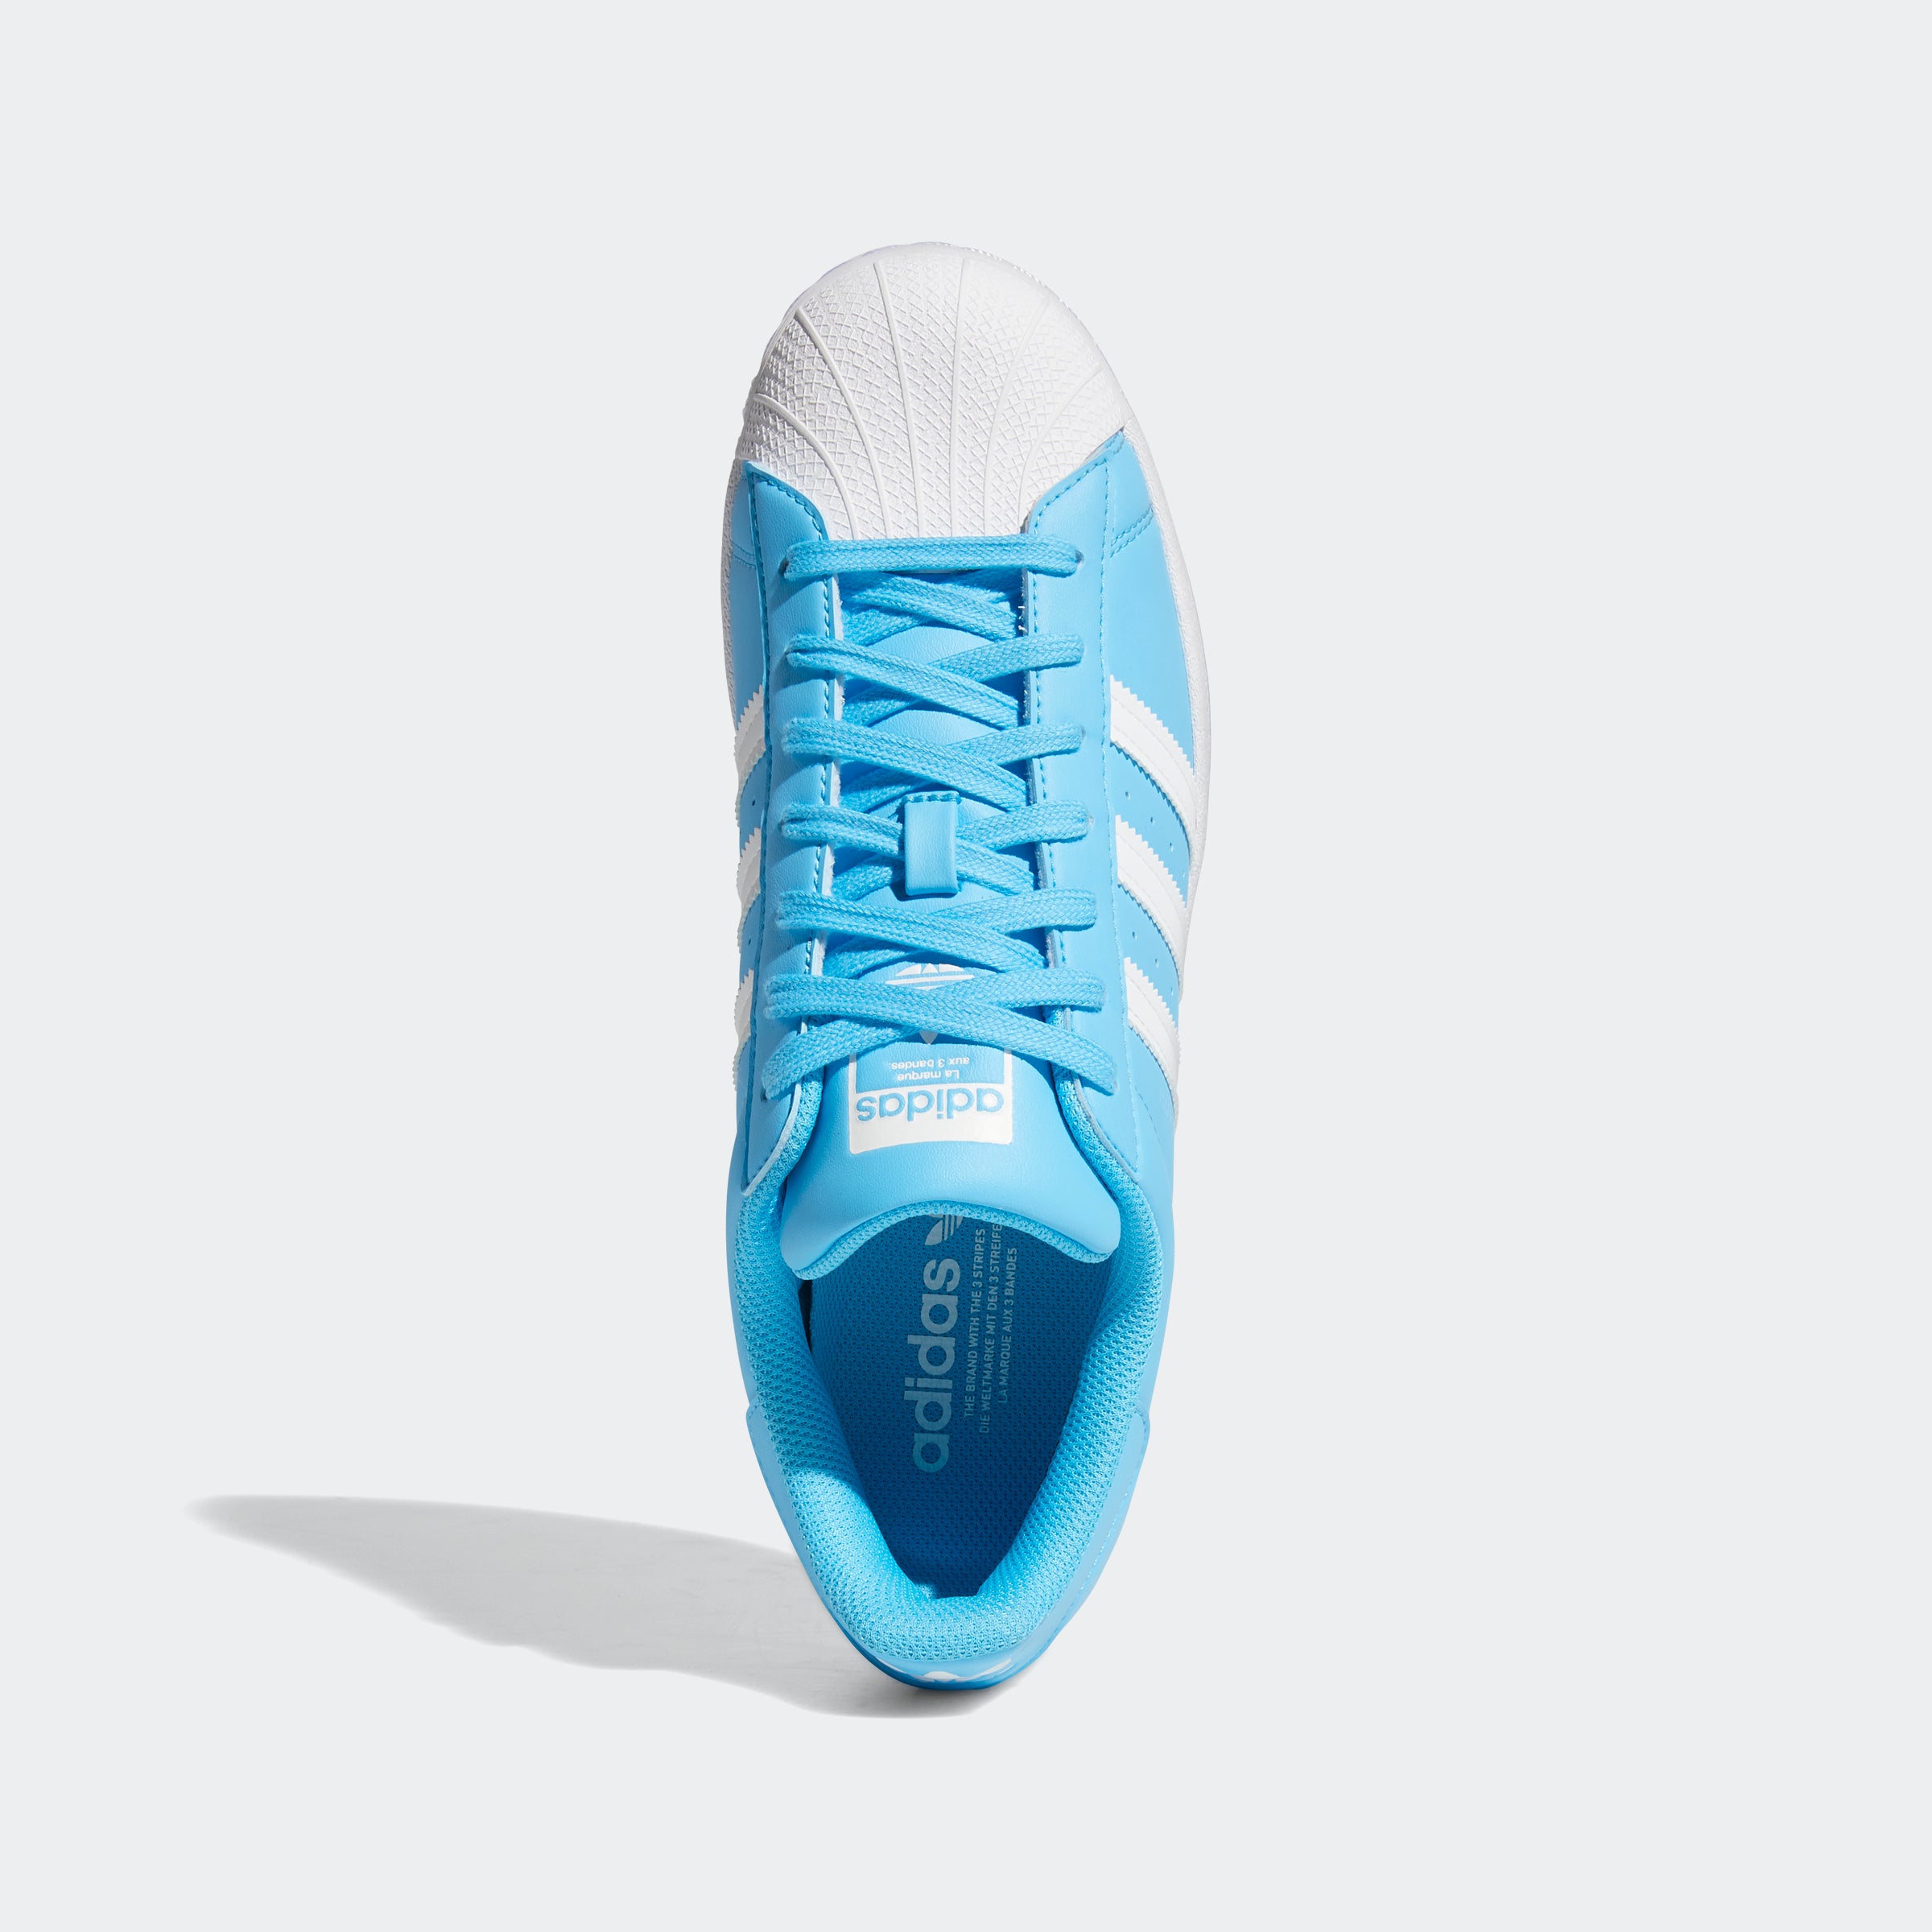 ADIDAS ORIGINALS Hand II leather-trimmed suede sneakers | NET-A-PORTER